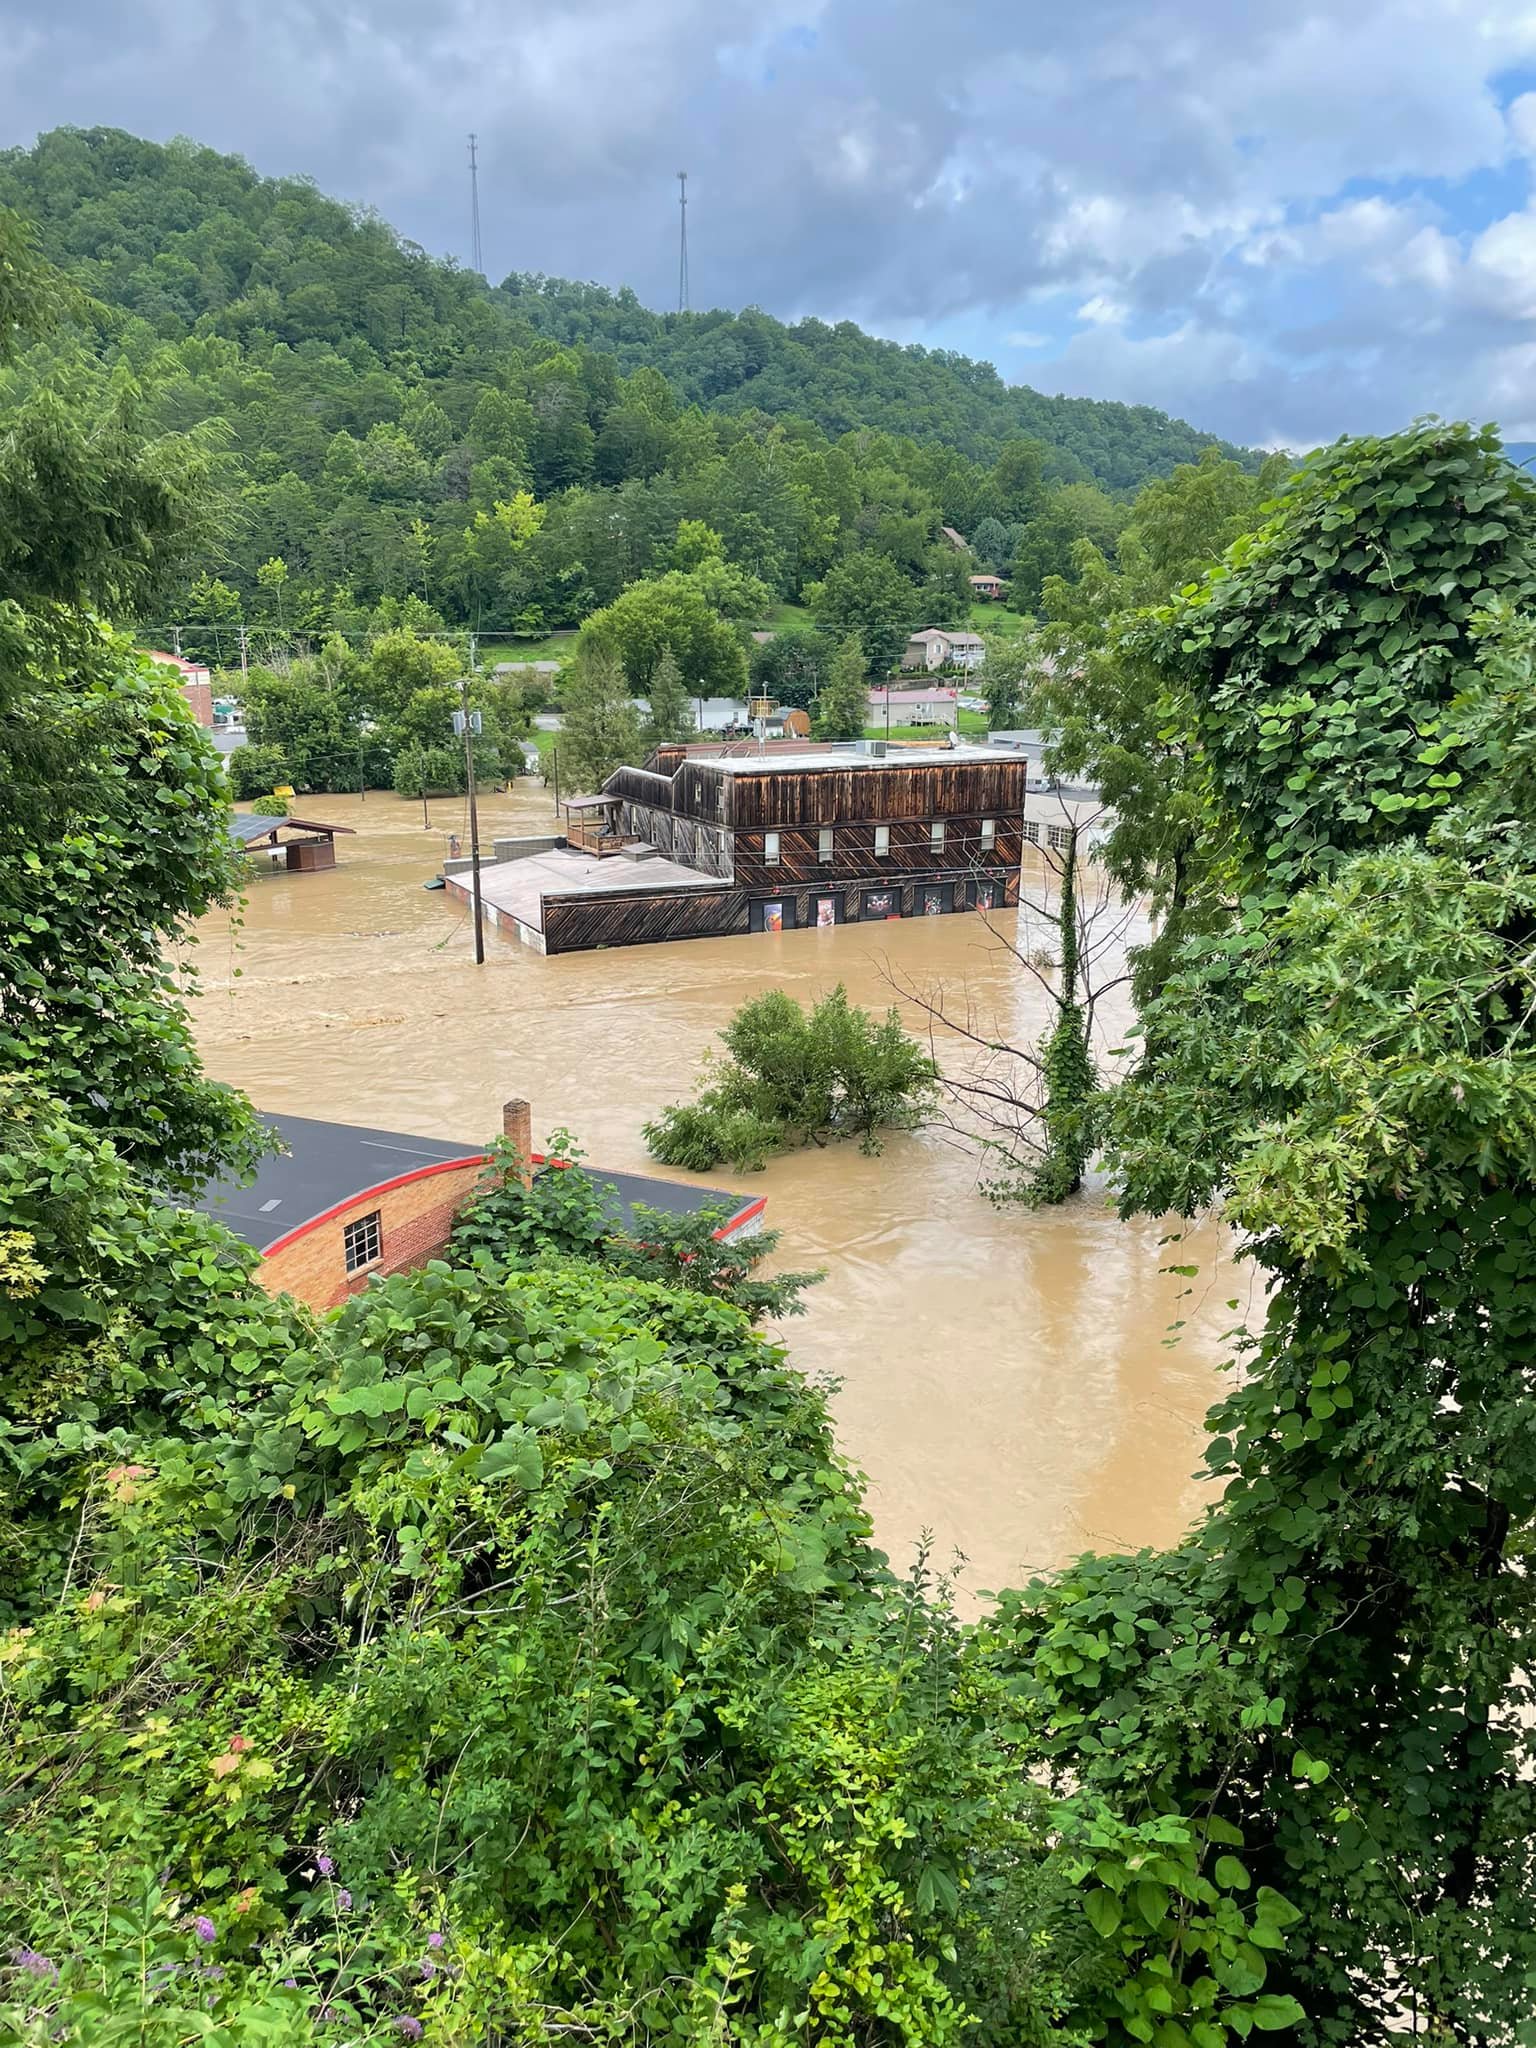 Severe flash flooding caused extensive damage in downtown Whitesburg